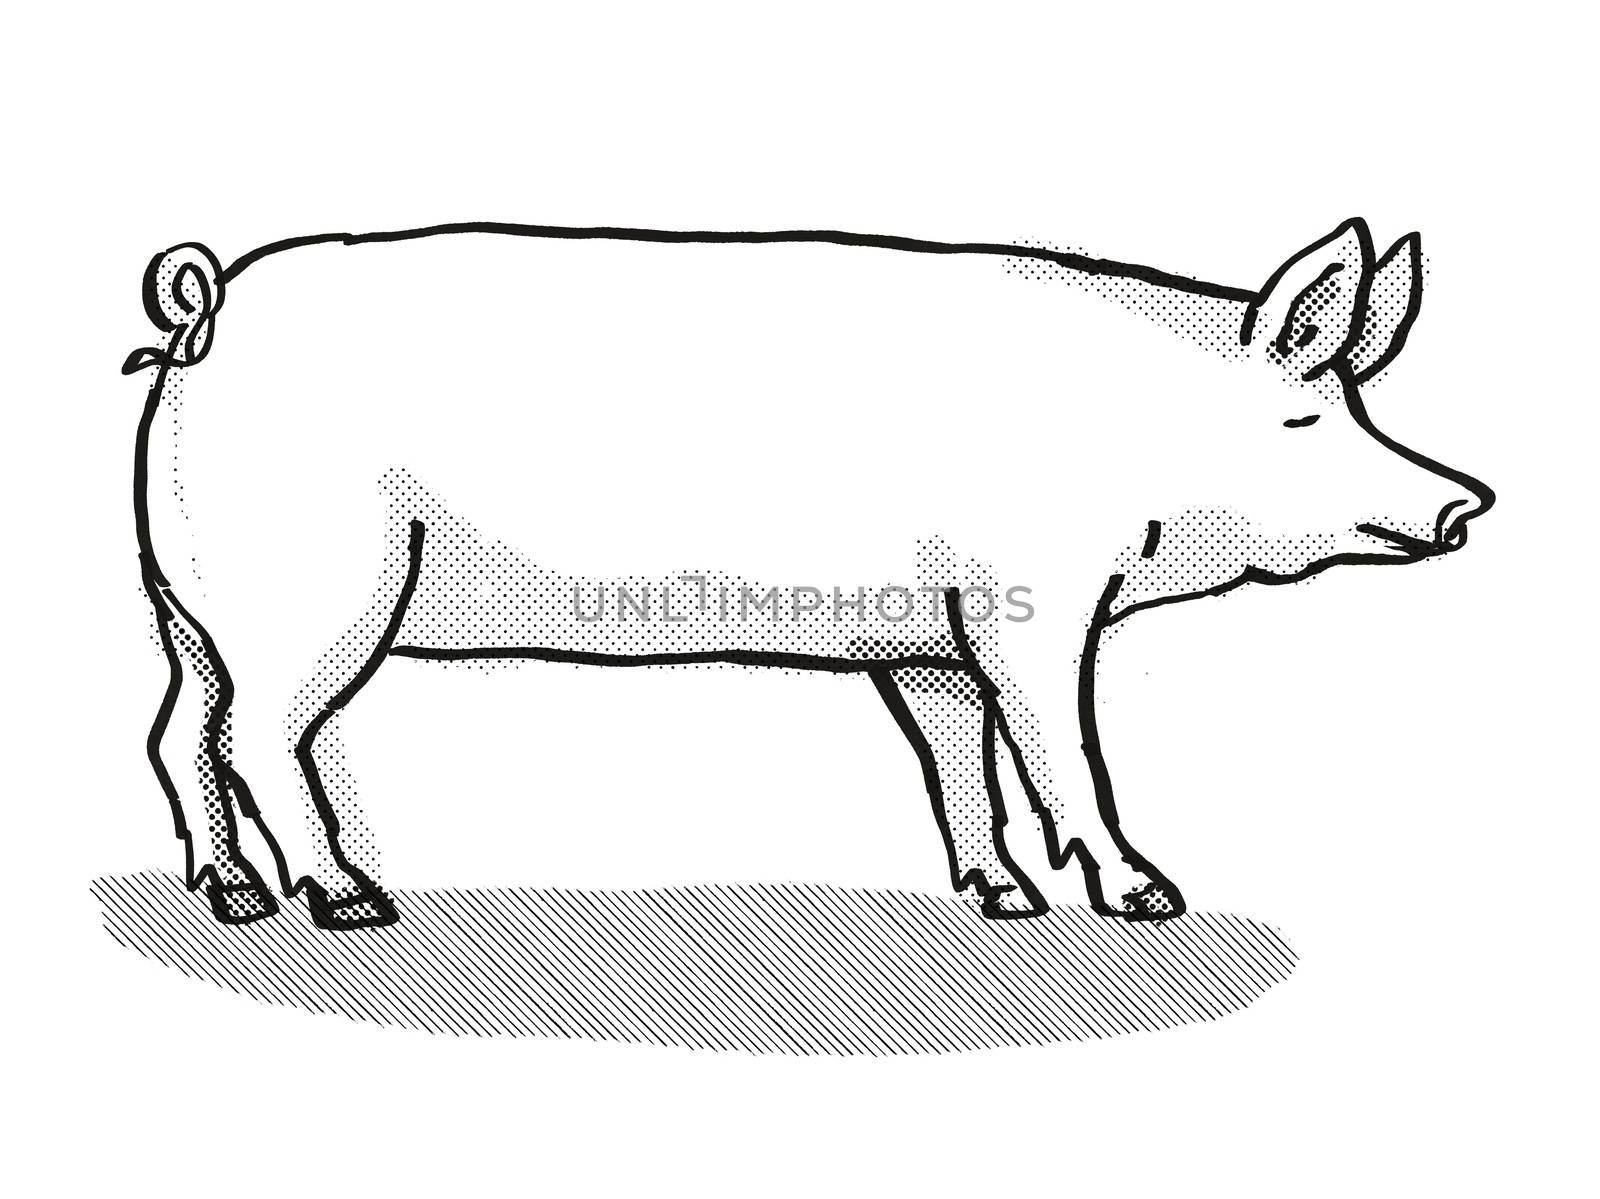 Retro cartoon style drawing of a Large White  sow or boar, a pig breed viewed from side on isolated white background done in black and white